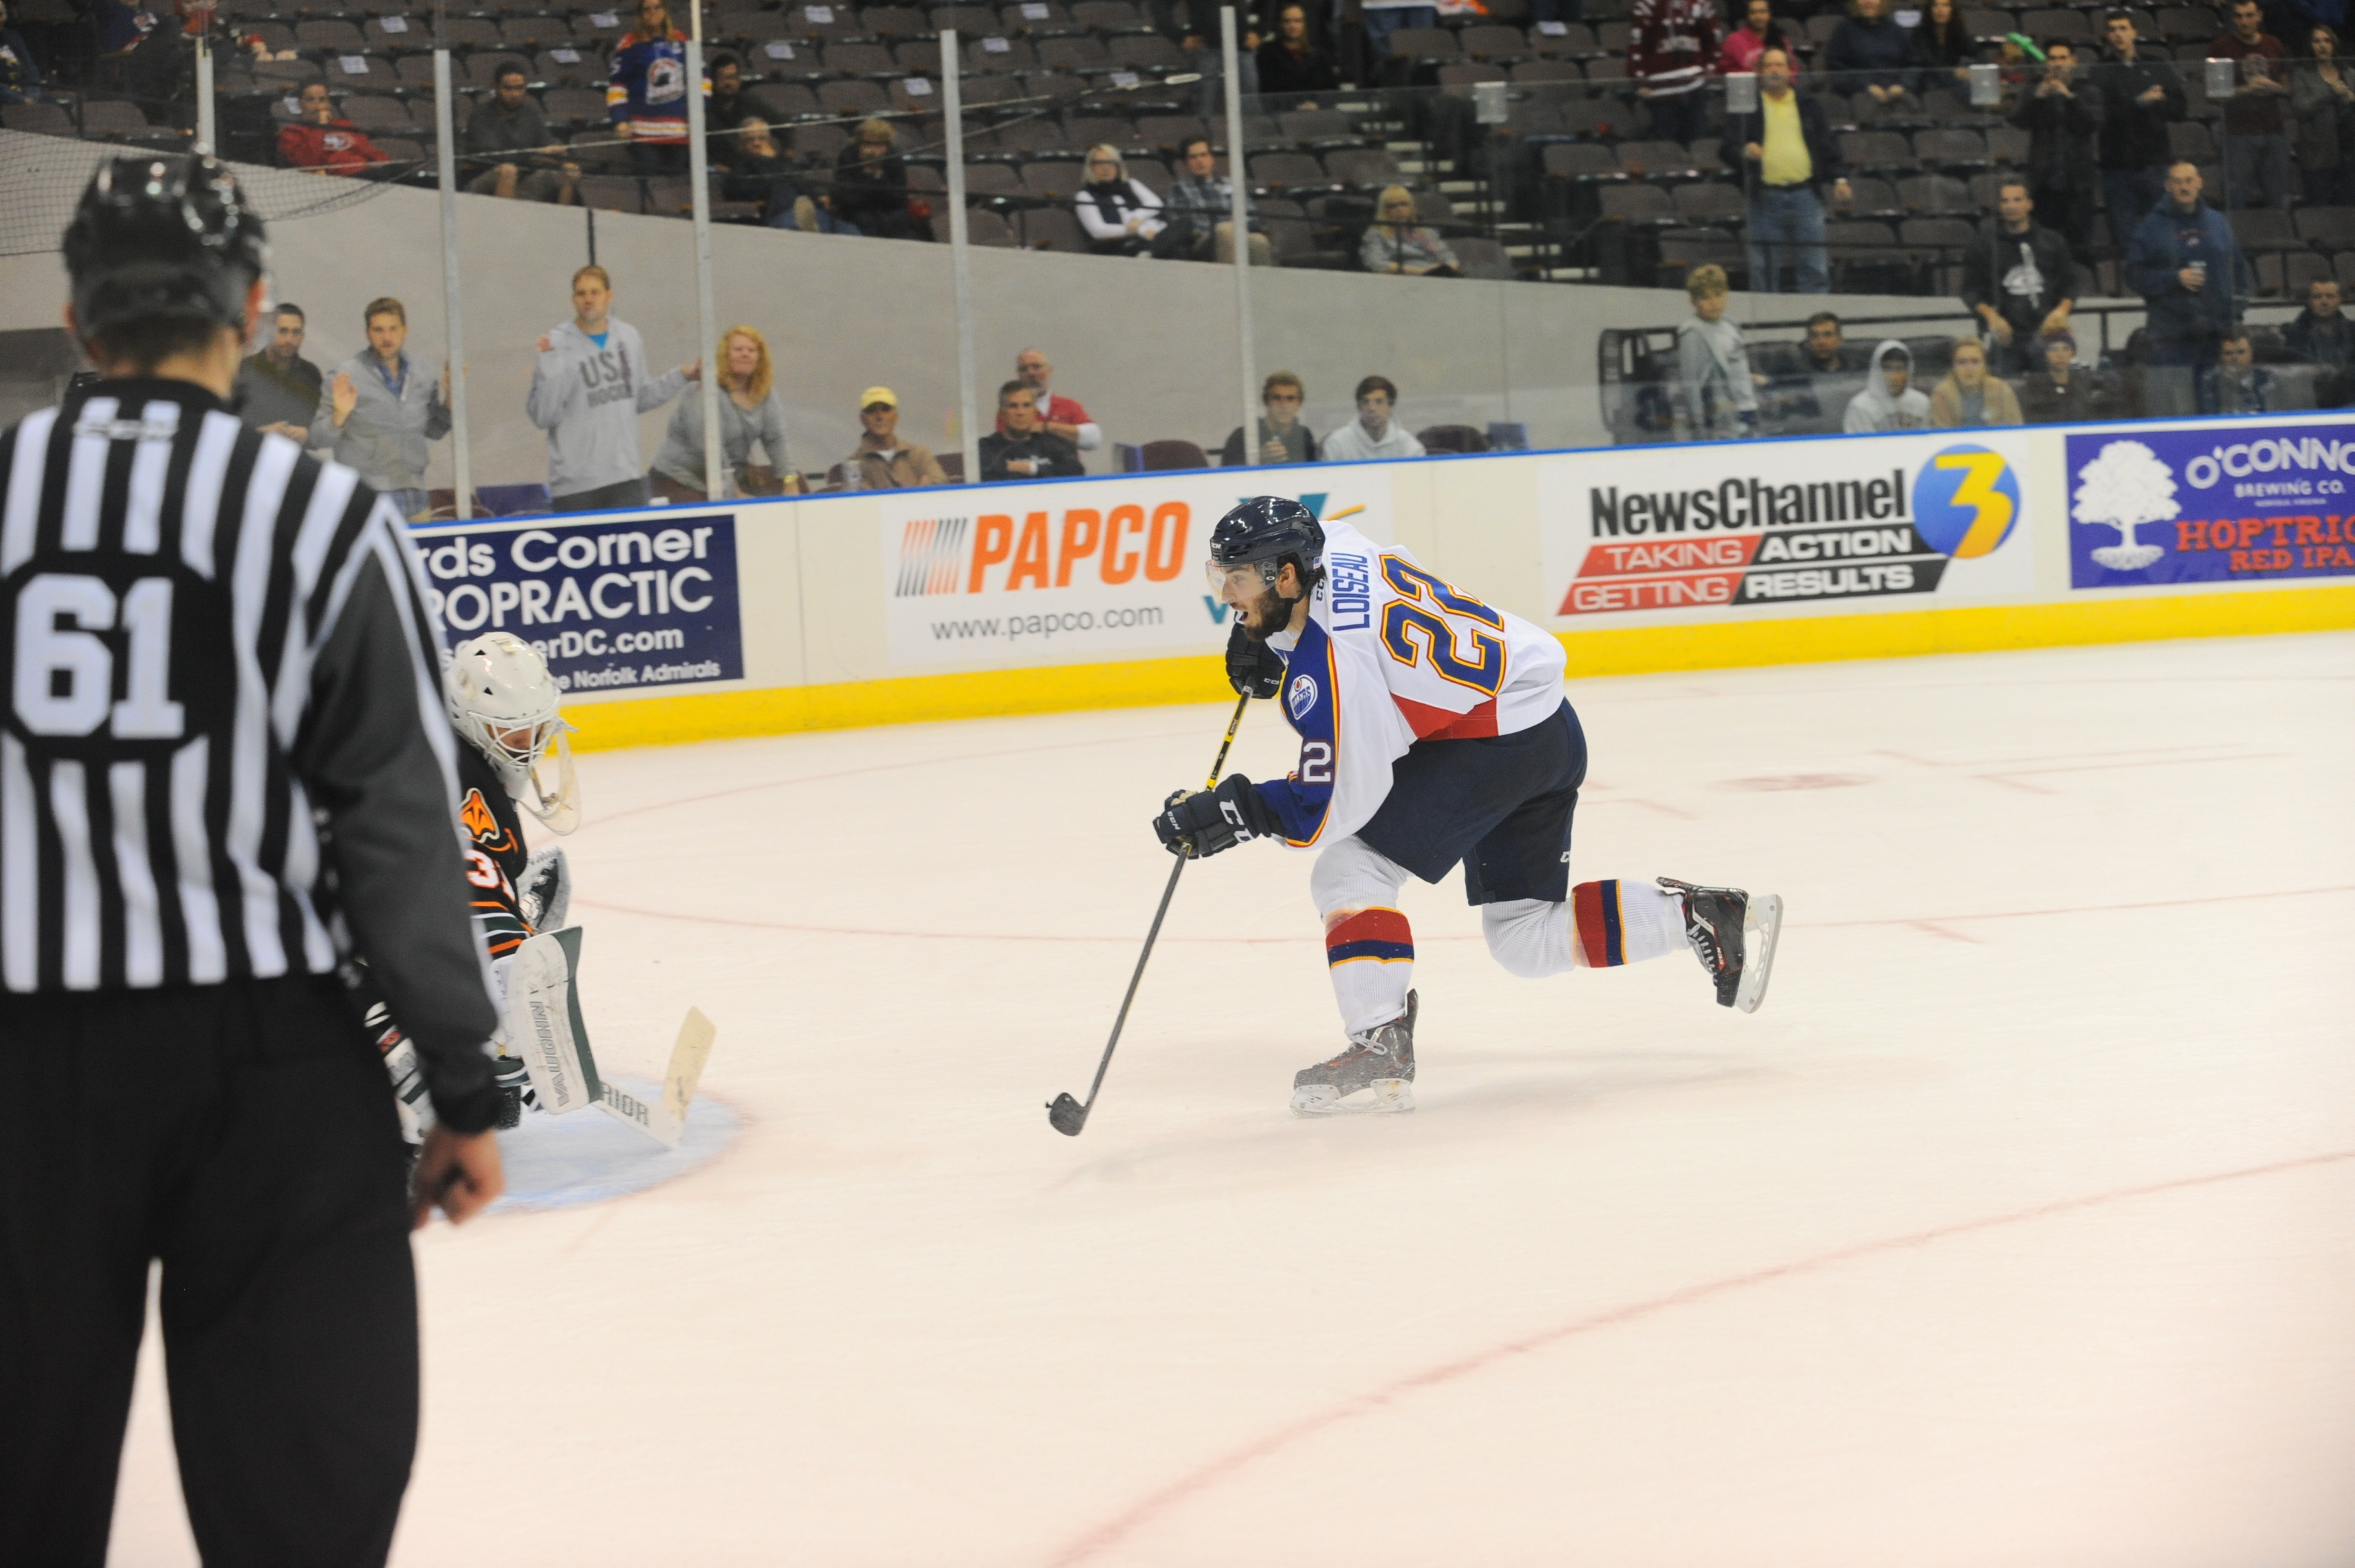 Norfolk Admirals' forward Alexis Loiseau scores the shoot-out winning goal against the Quad City Mallards October 30, 2015